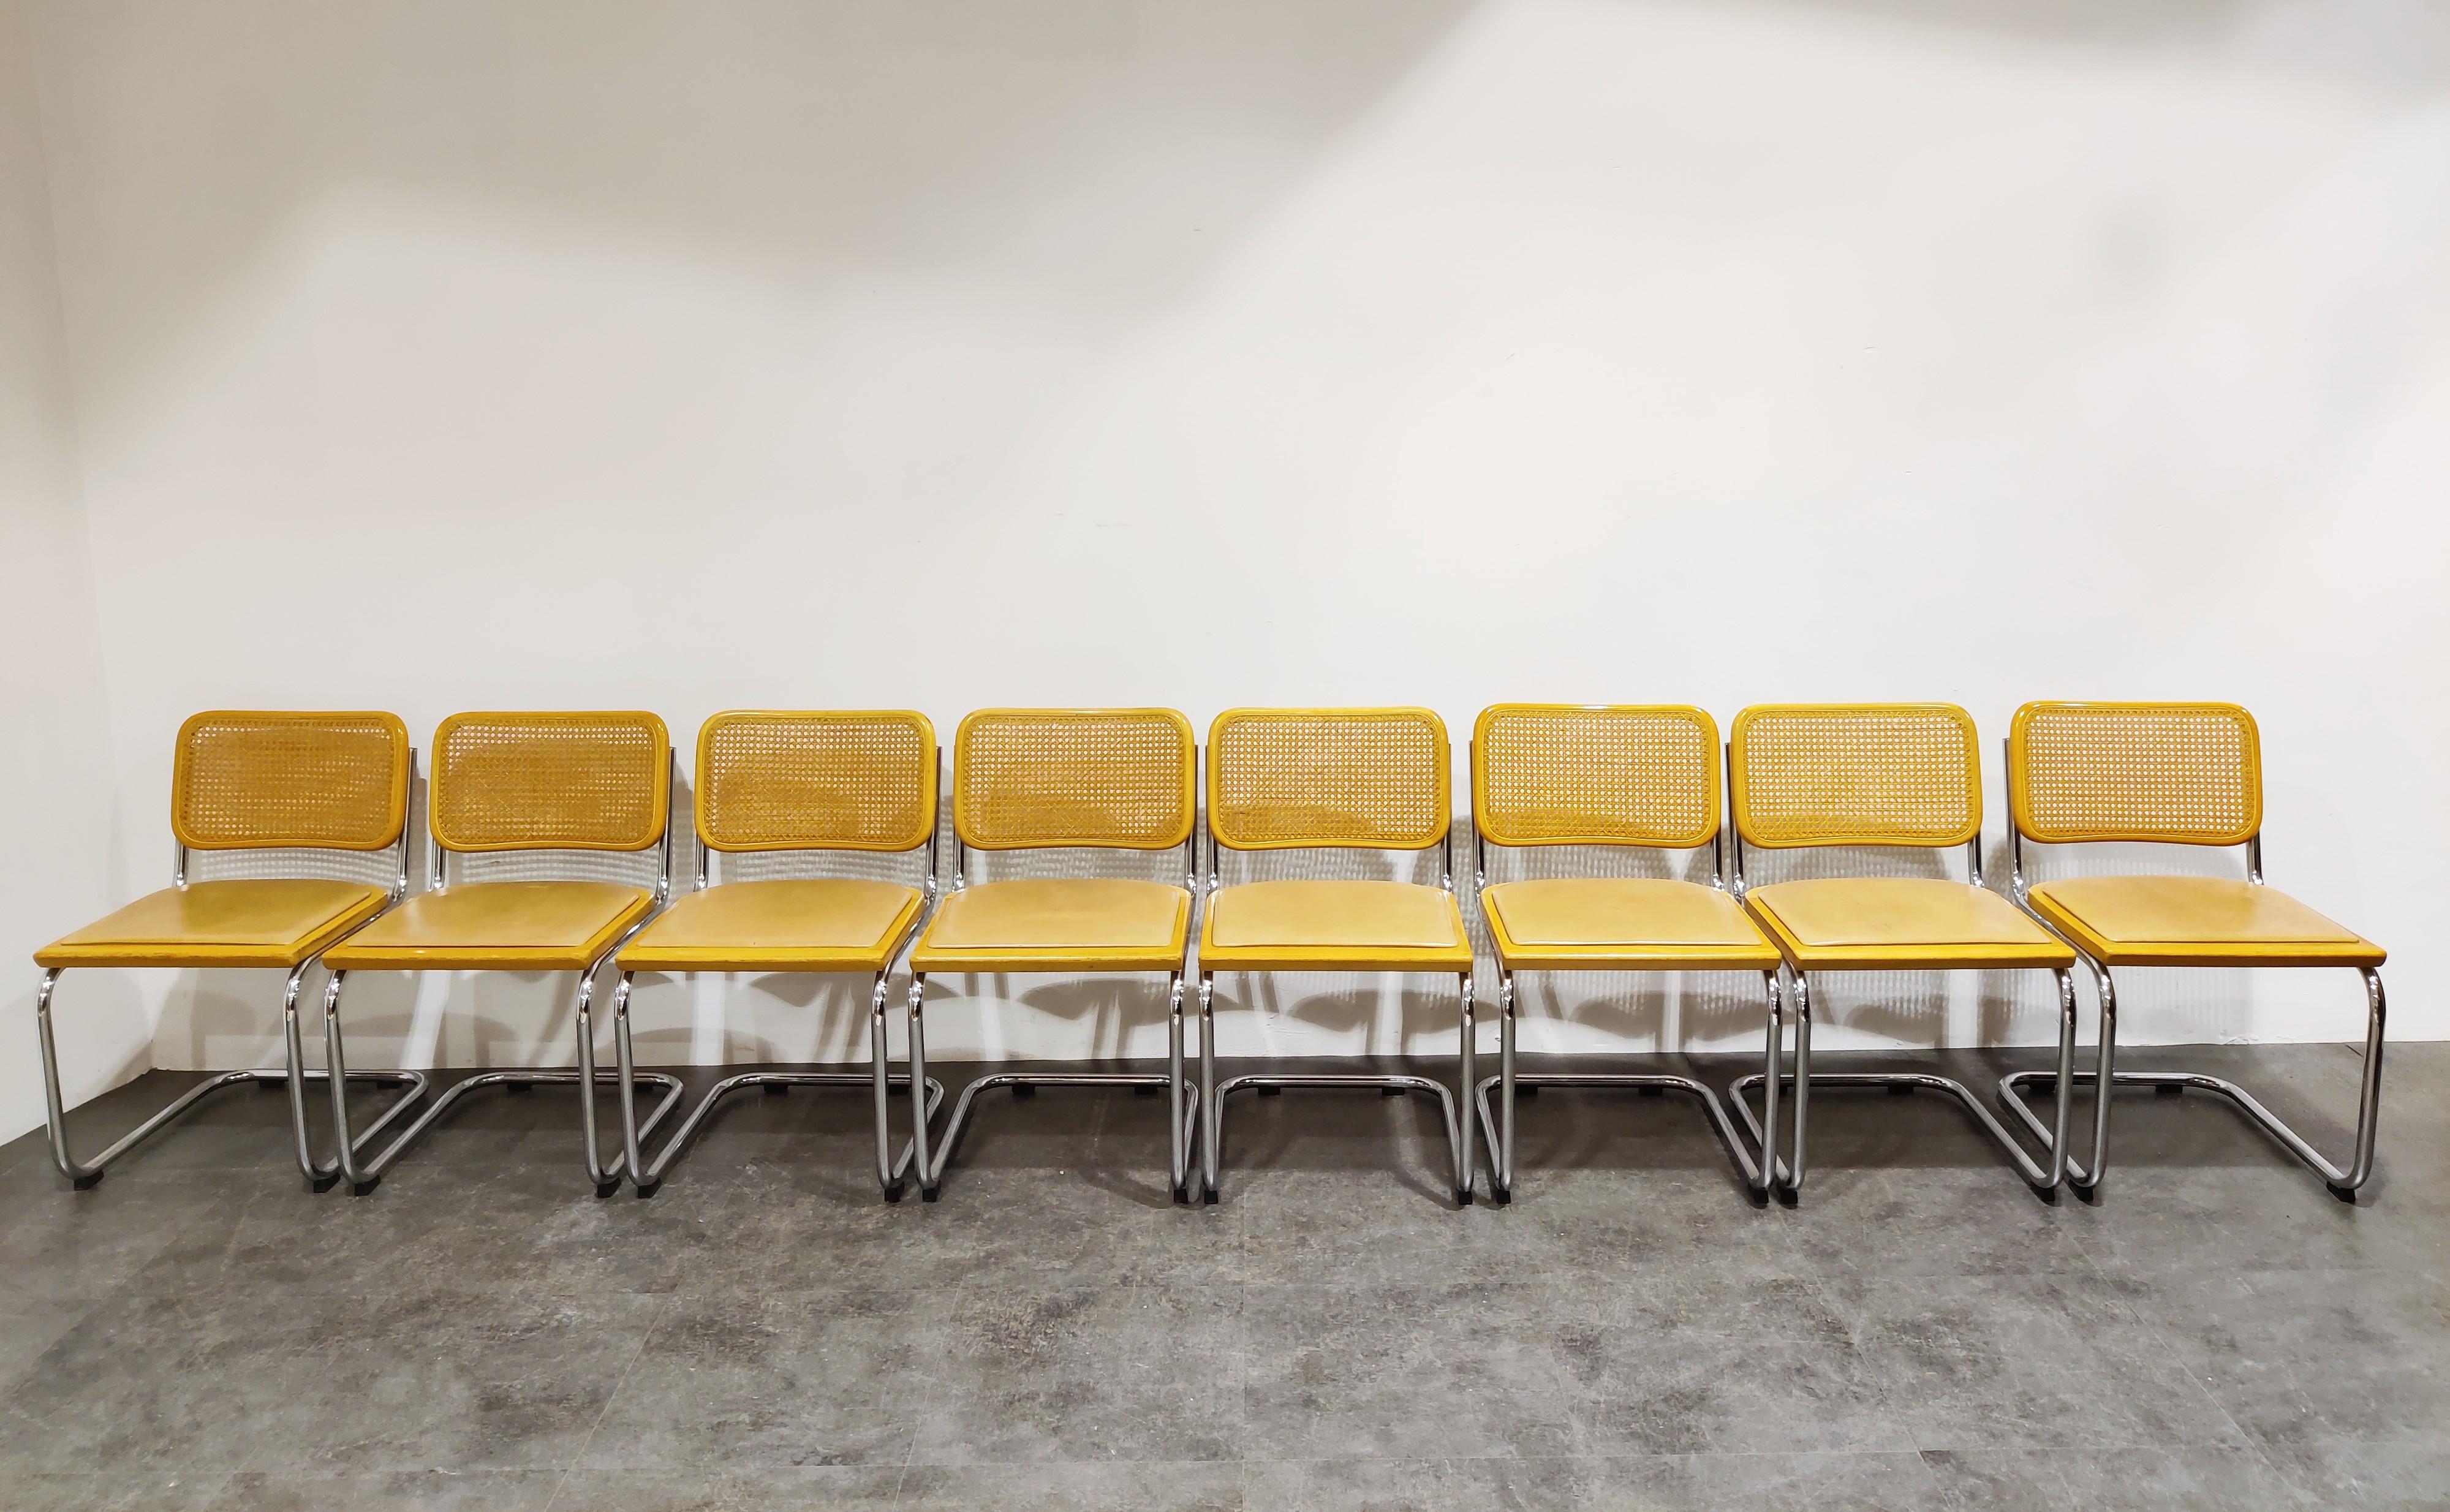 Marcel Breuer Bauhaus design chairs, set of 8. 

Good condition, polished chrome.

The chairs are very popular and the original design dates back to the 1920s. 

Come with cane webbing backrets and brown skai upholstered seats

1970s -